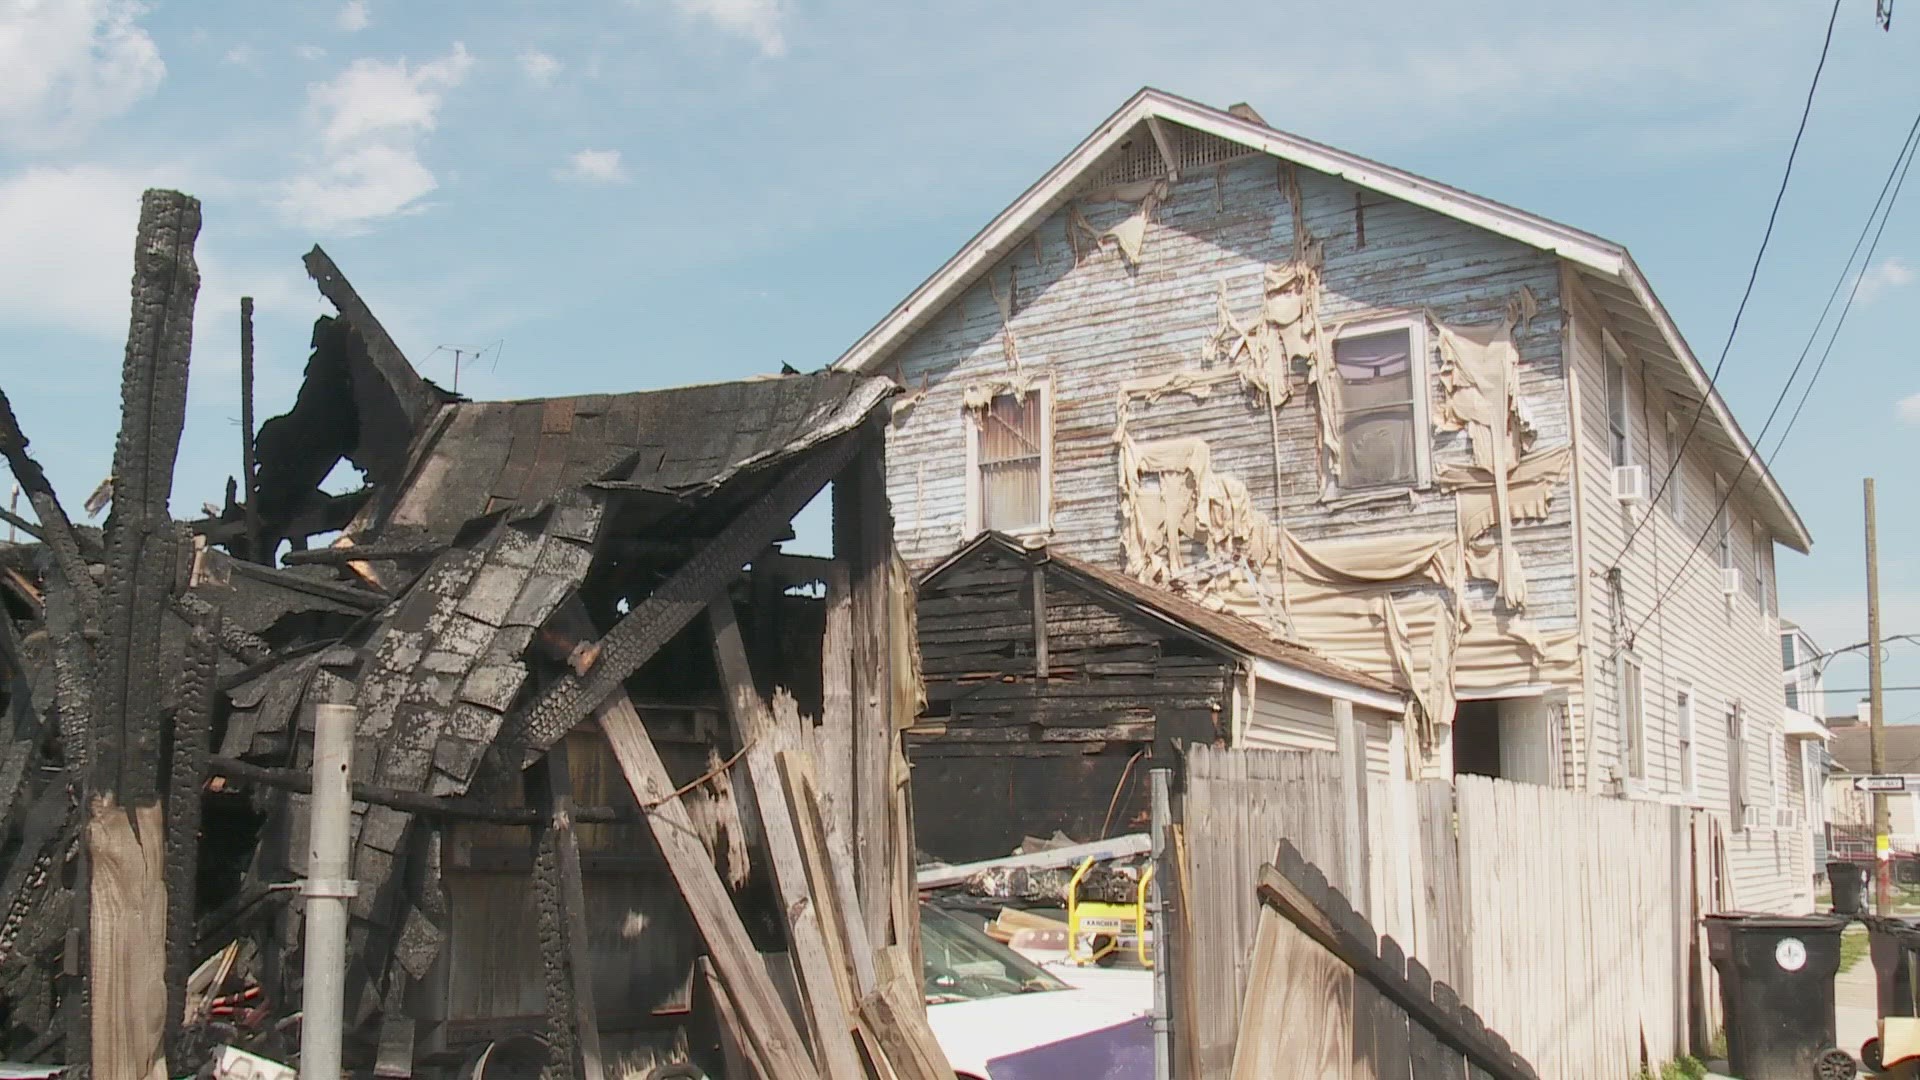 On Sunday evening, friends and family were salvaging what was left of Desiree Andrews' home.